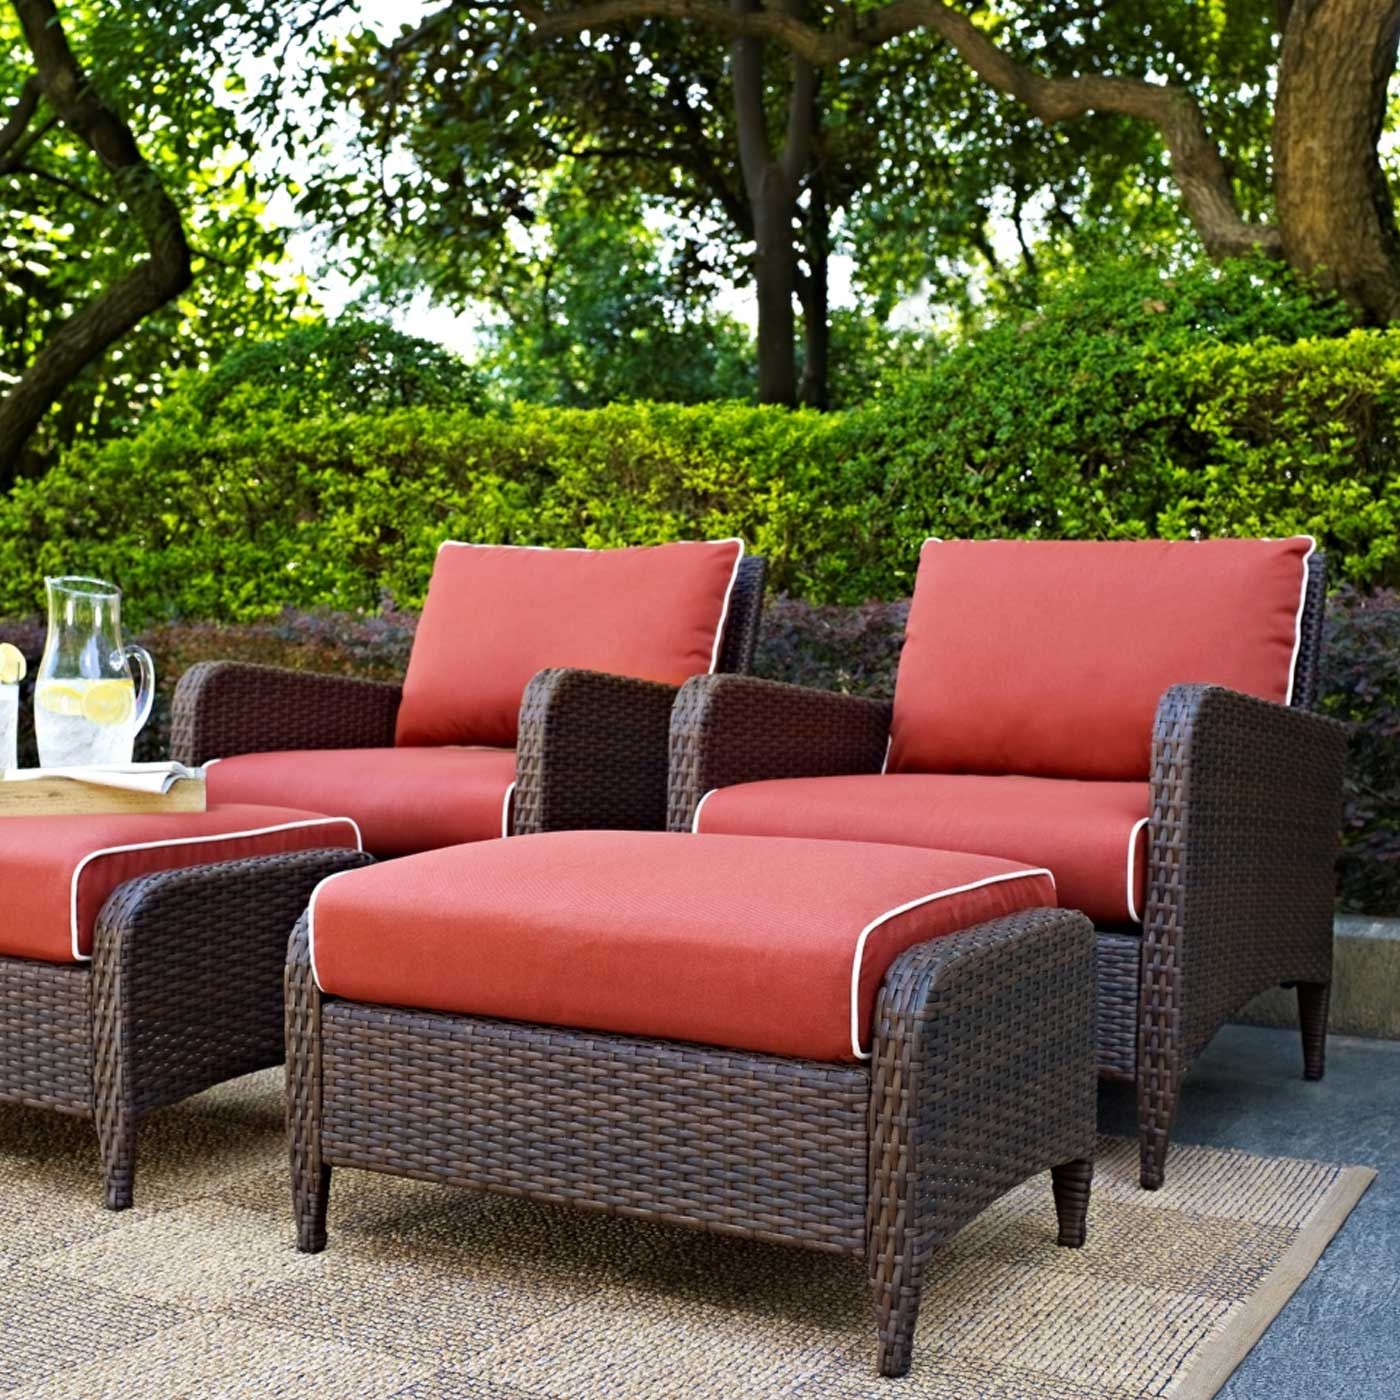 Crosley Kiawah 4 Piece Outdoor Wicker Seating Set With Sangria Cushions In 4 Piece Outdoor Seating Patio Sets (View 2 of 15)